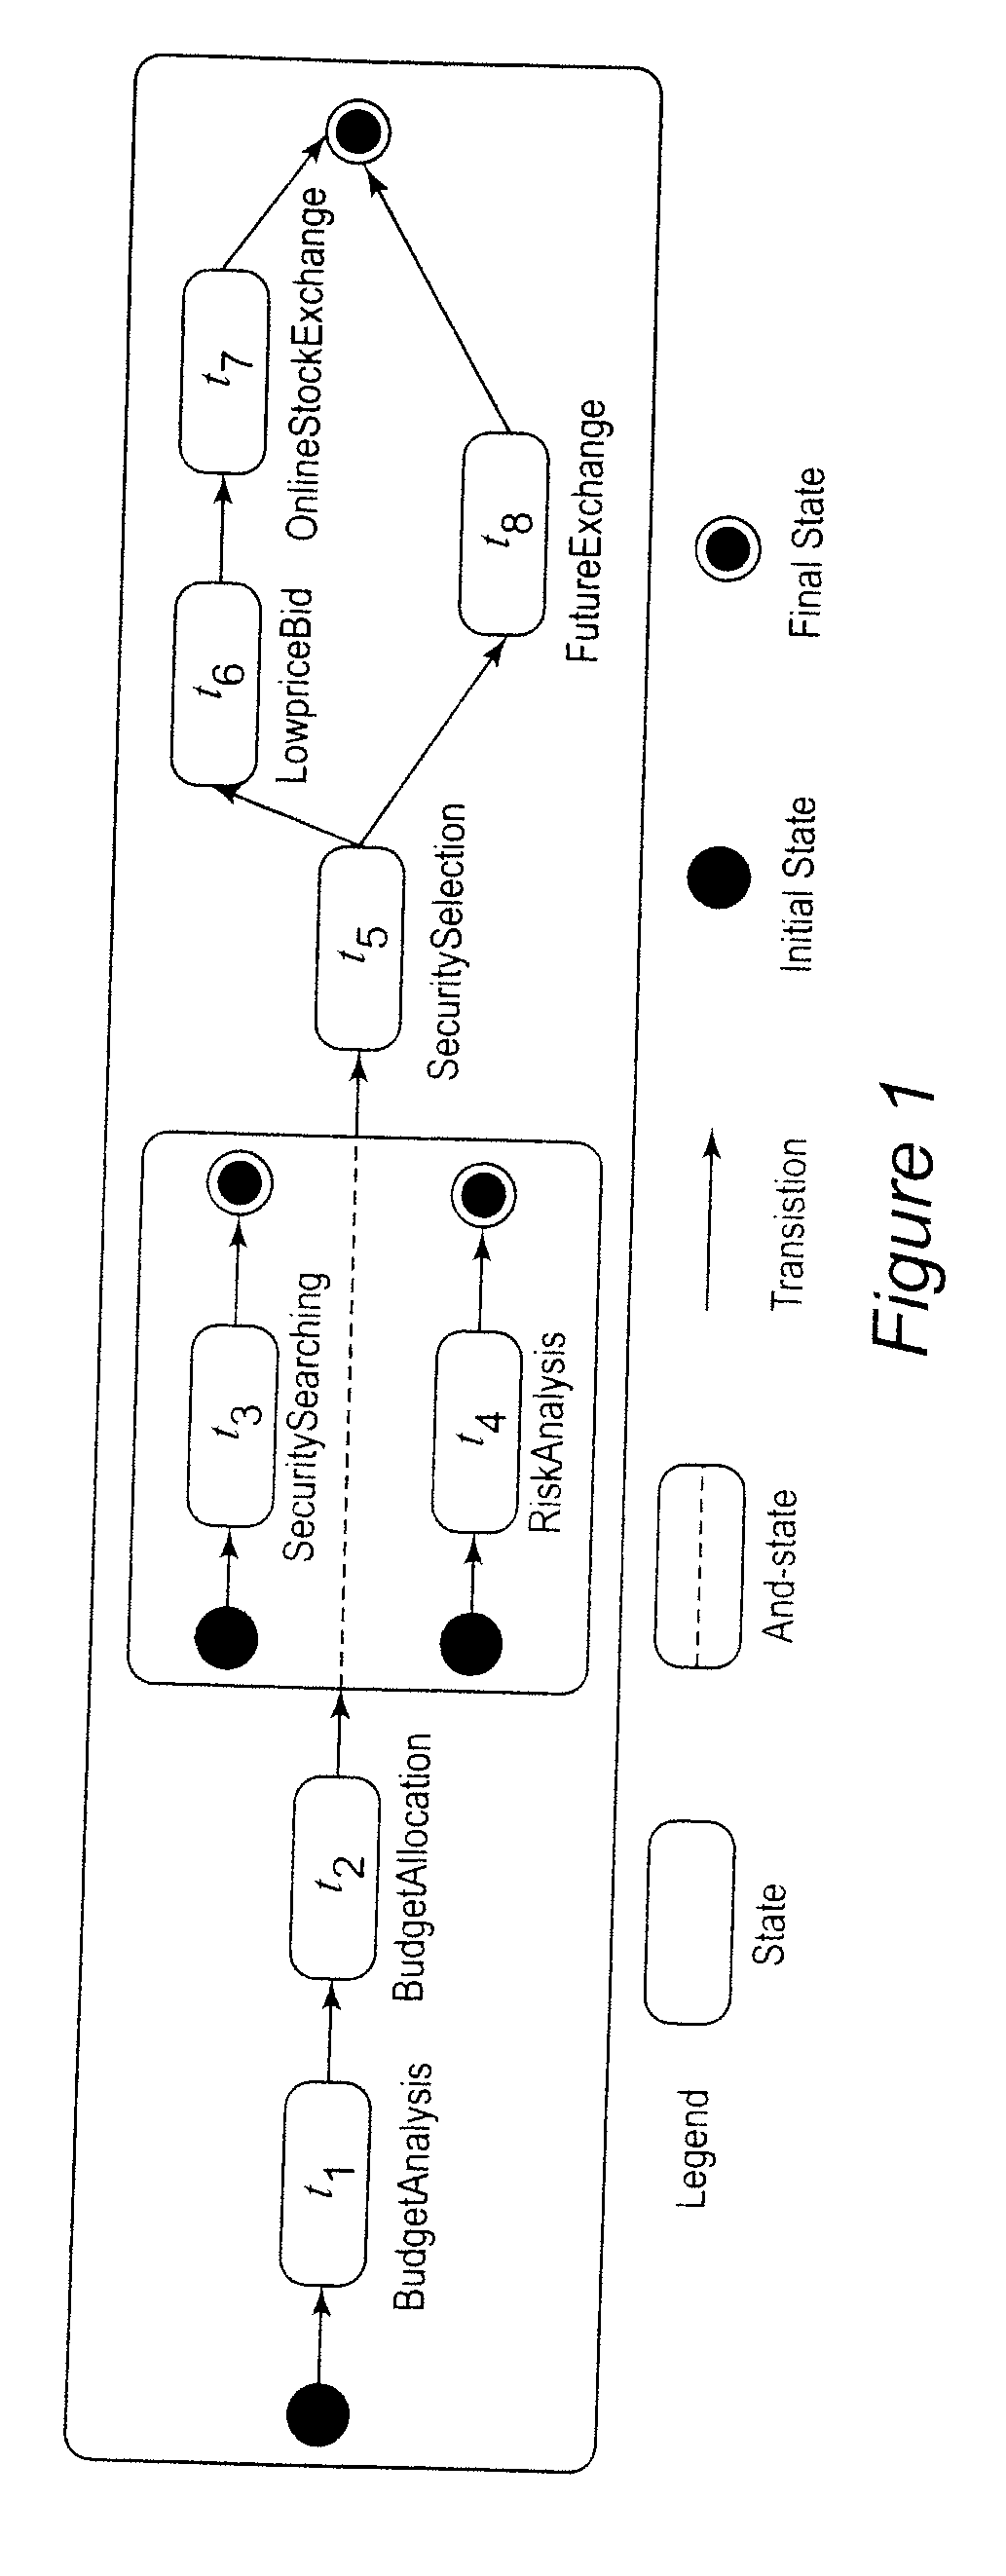 Apparatus and method for policy-driven business process exception handling